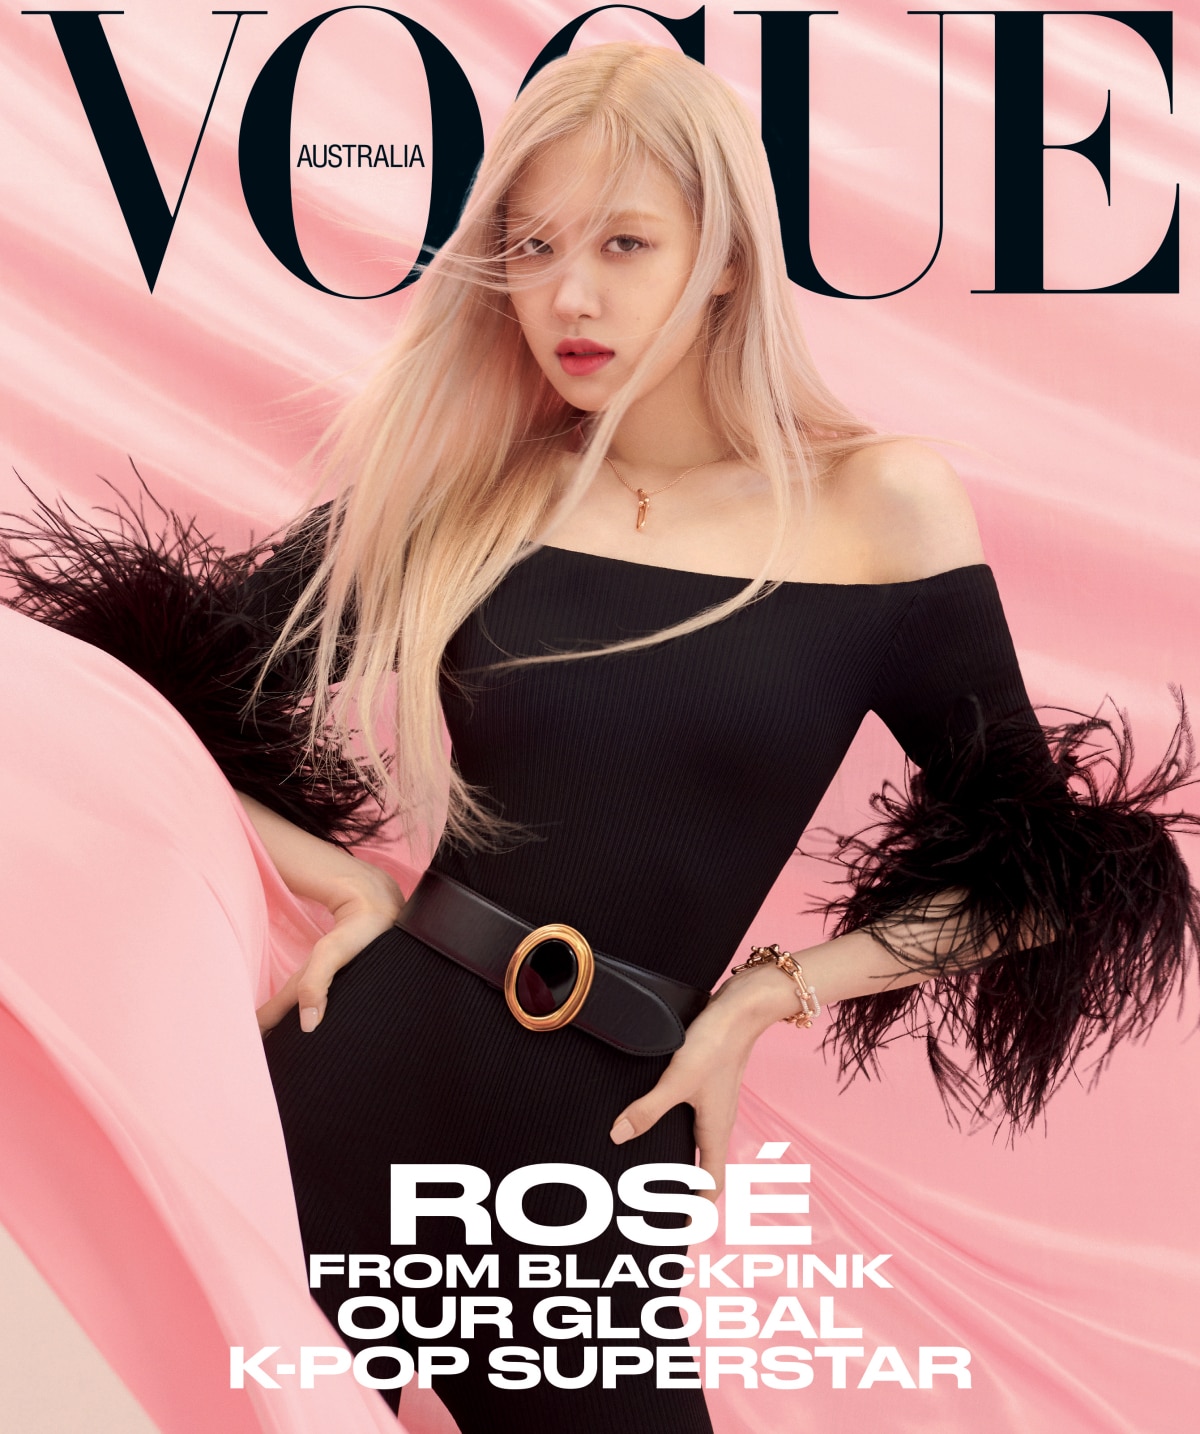 Blackpink'sRosé on the cover of Vogue Australia April 2021. Photographed by Peter Ash Lee. Styled by Christine Centenera.